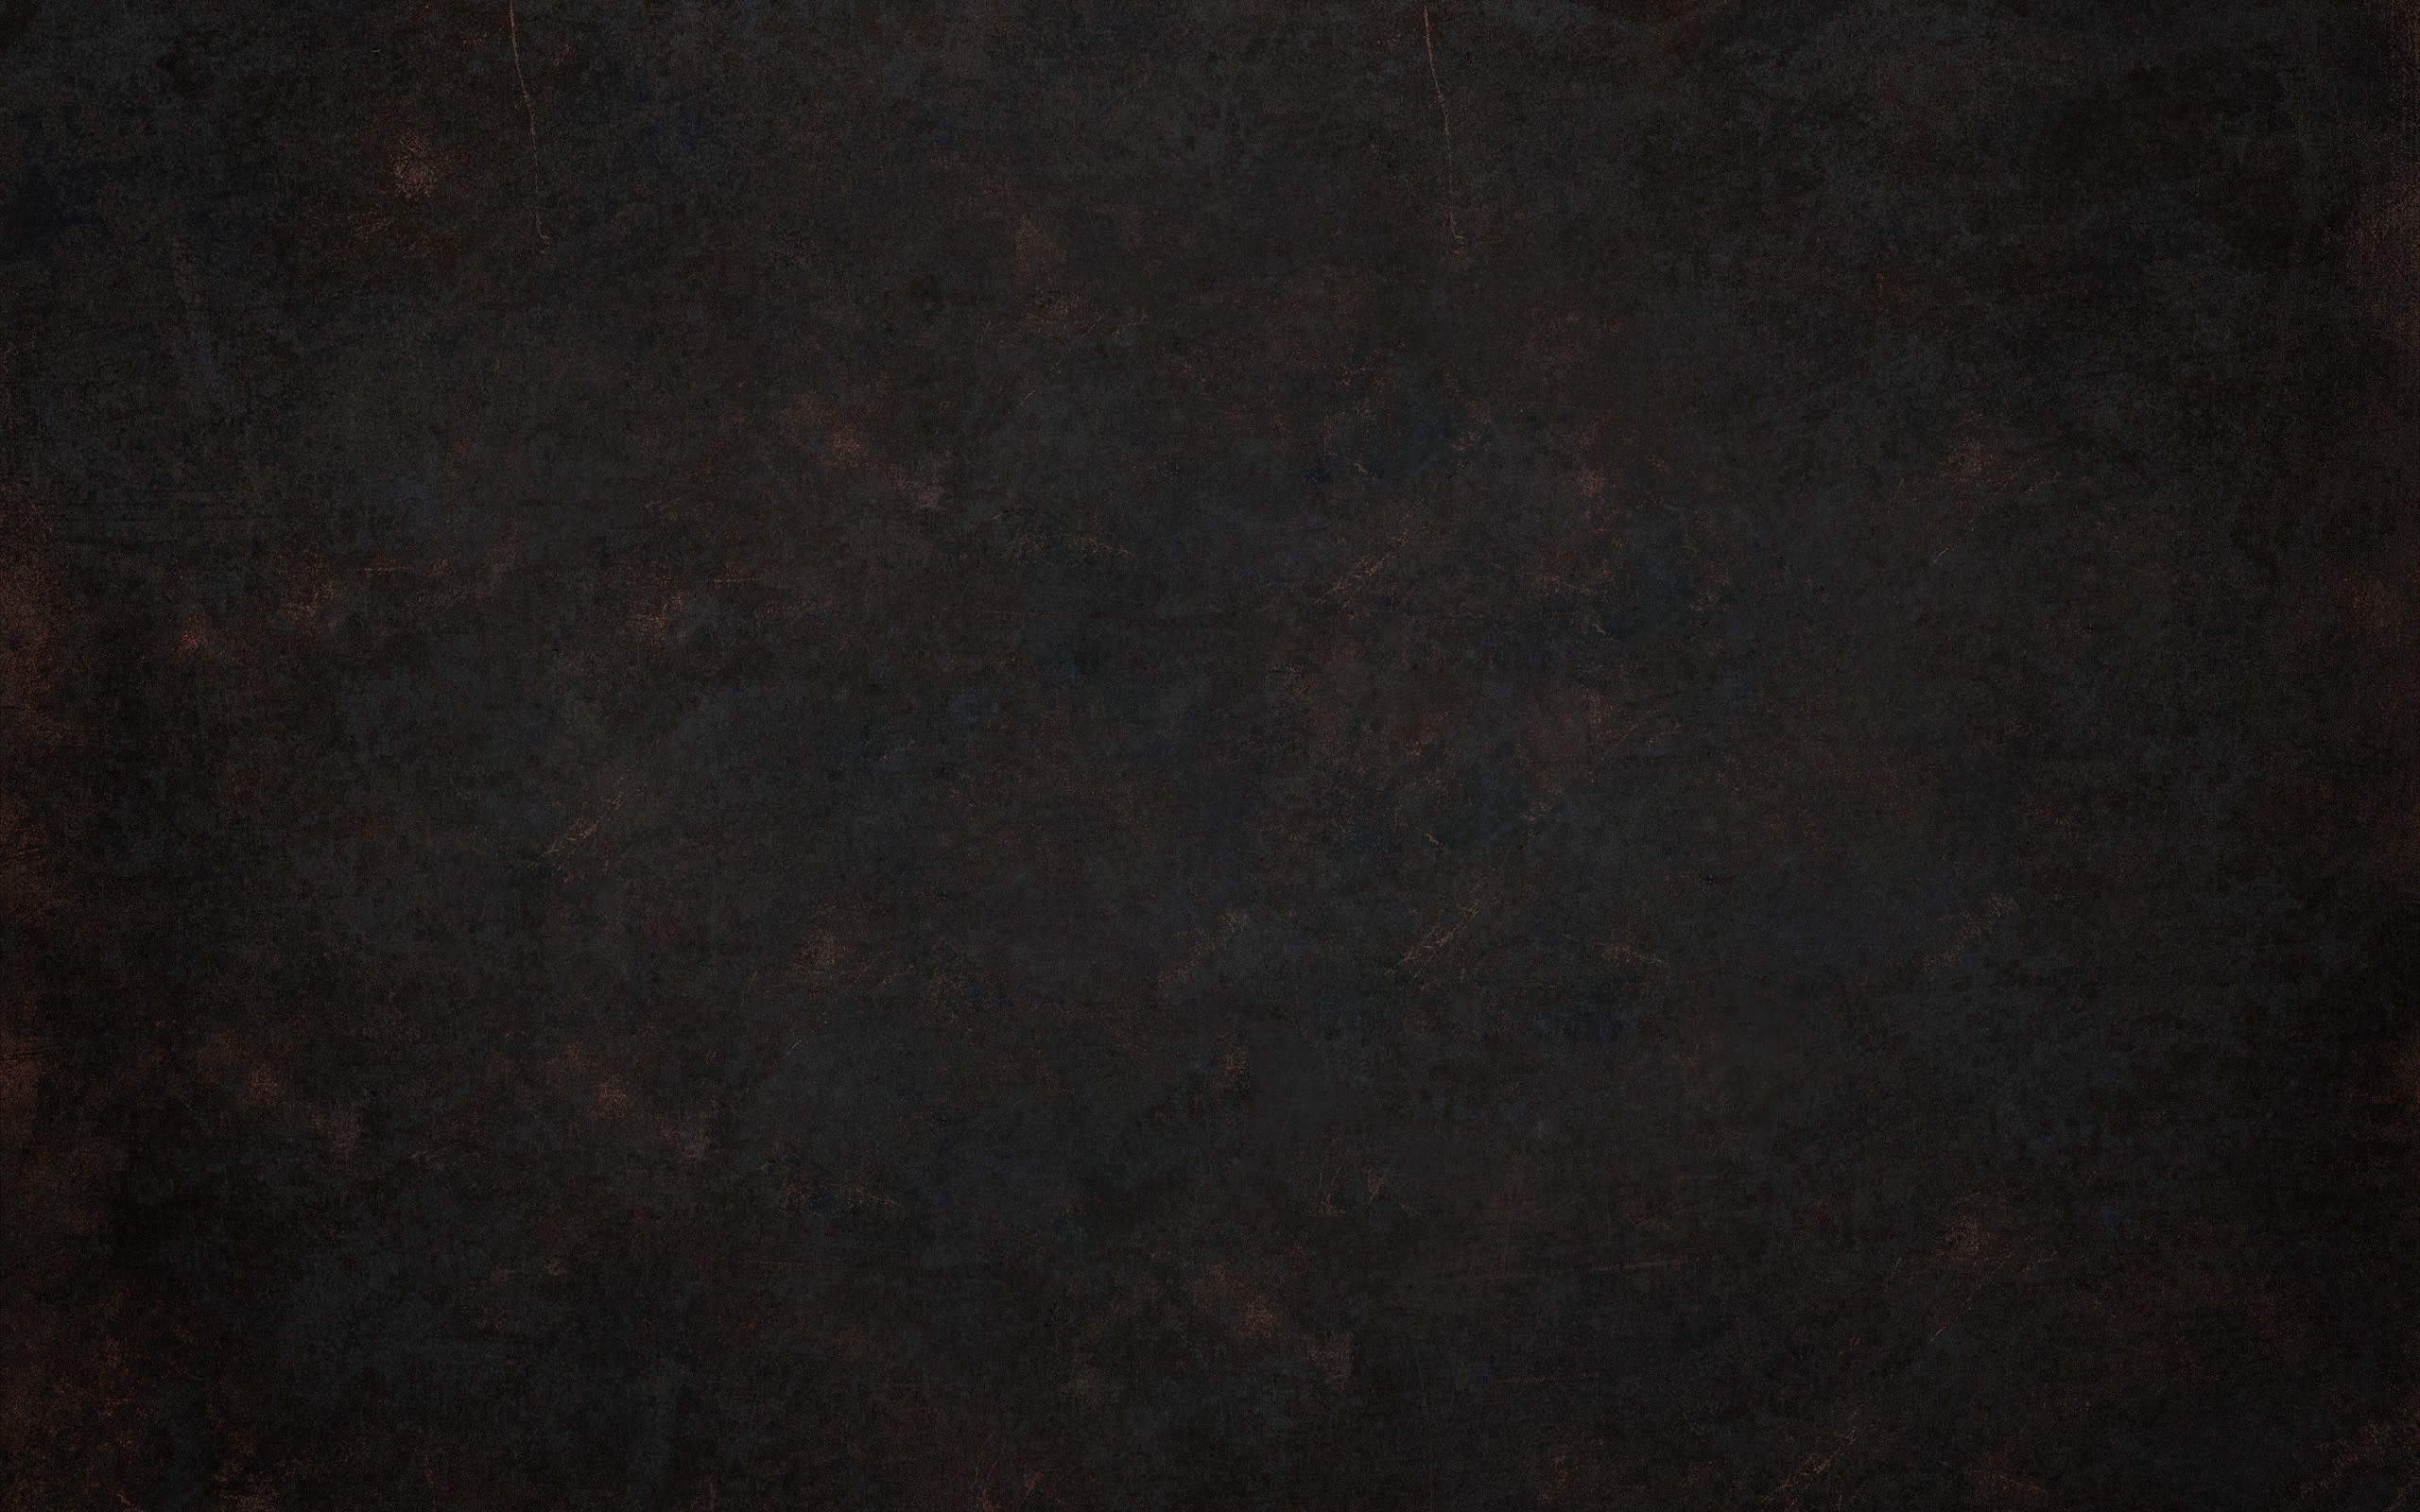 Free HD, 4K, 32K, Ultra HD texture, stains, textures, spots